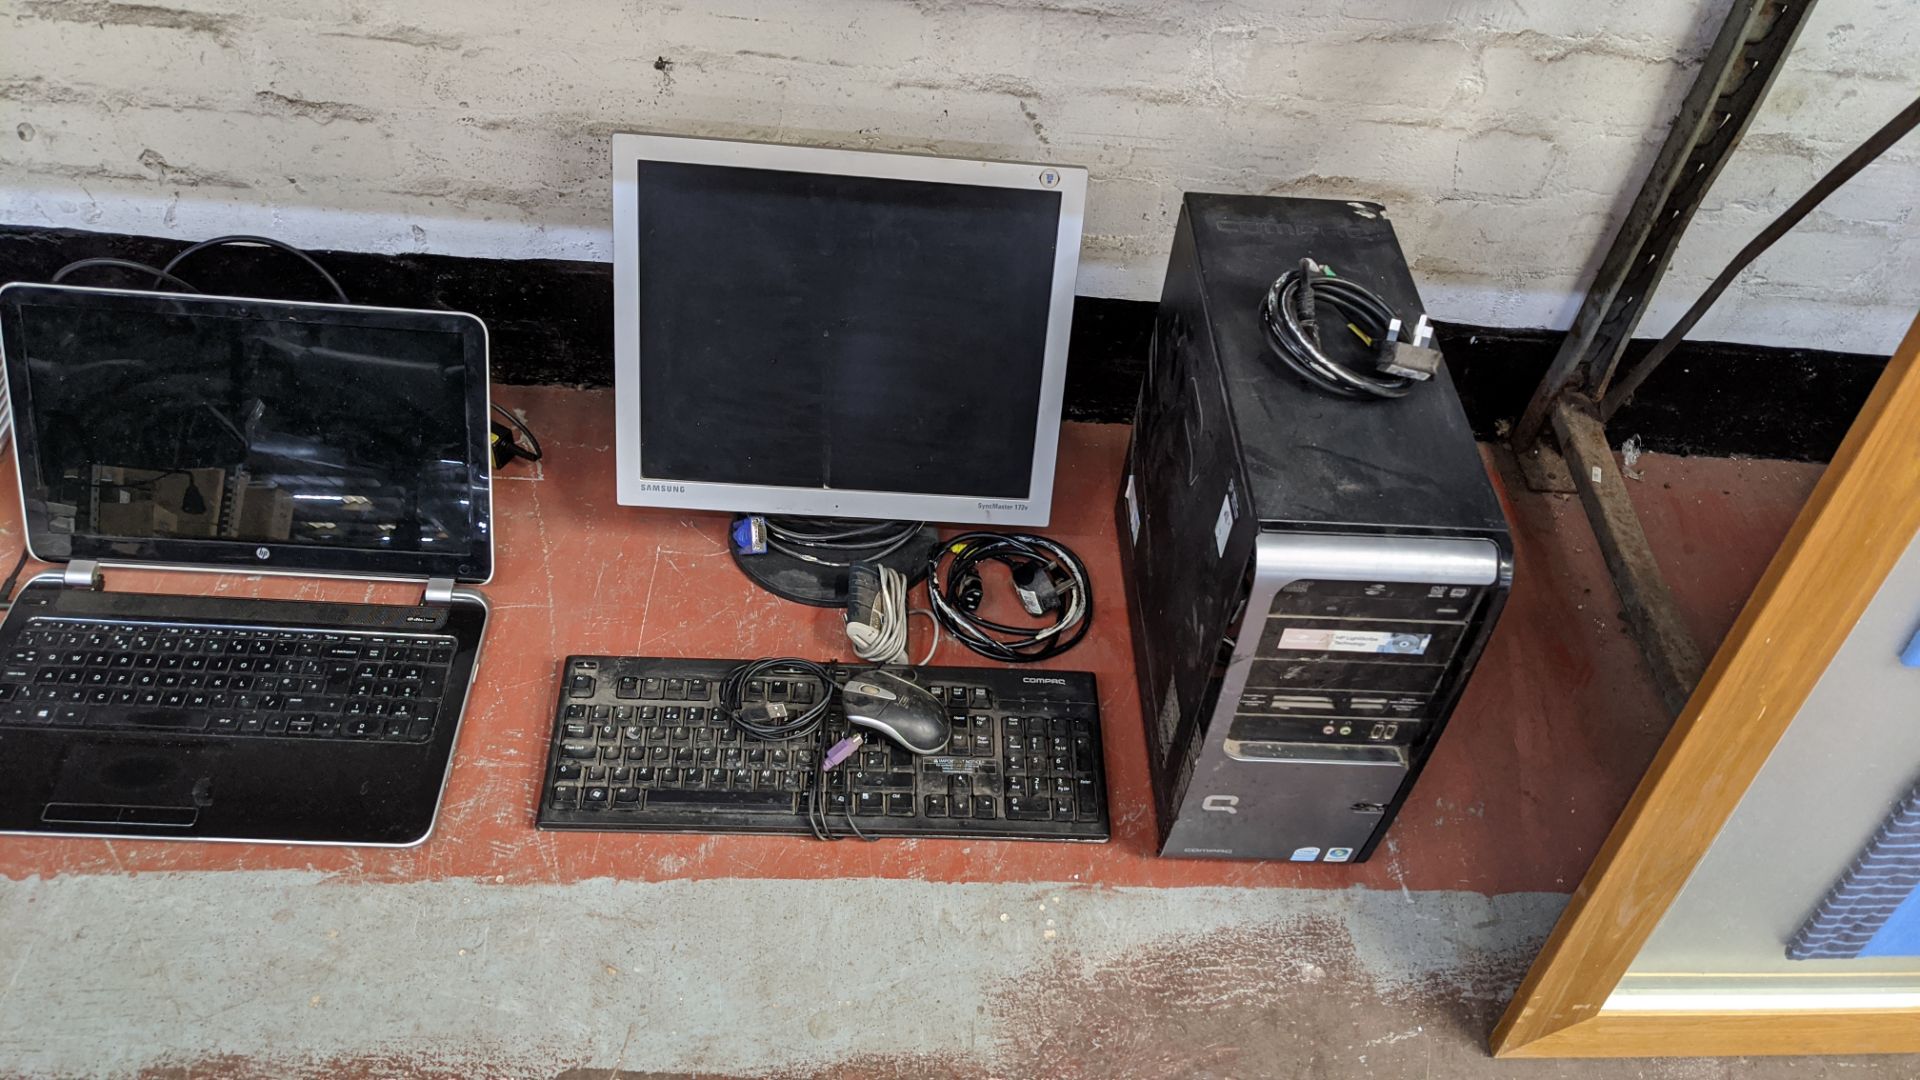 Contents of 2 shelves of assorted IT equipment including telephones, printers, computers, dash cams, - Image 7 of 13